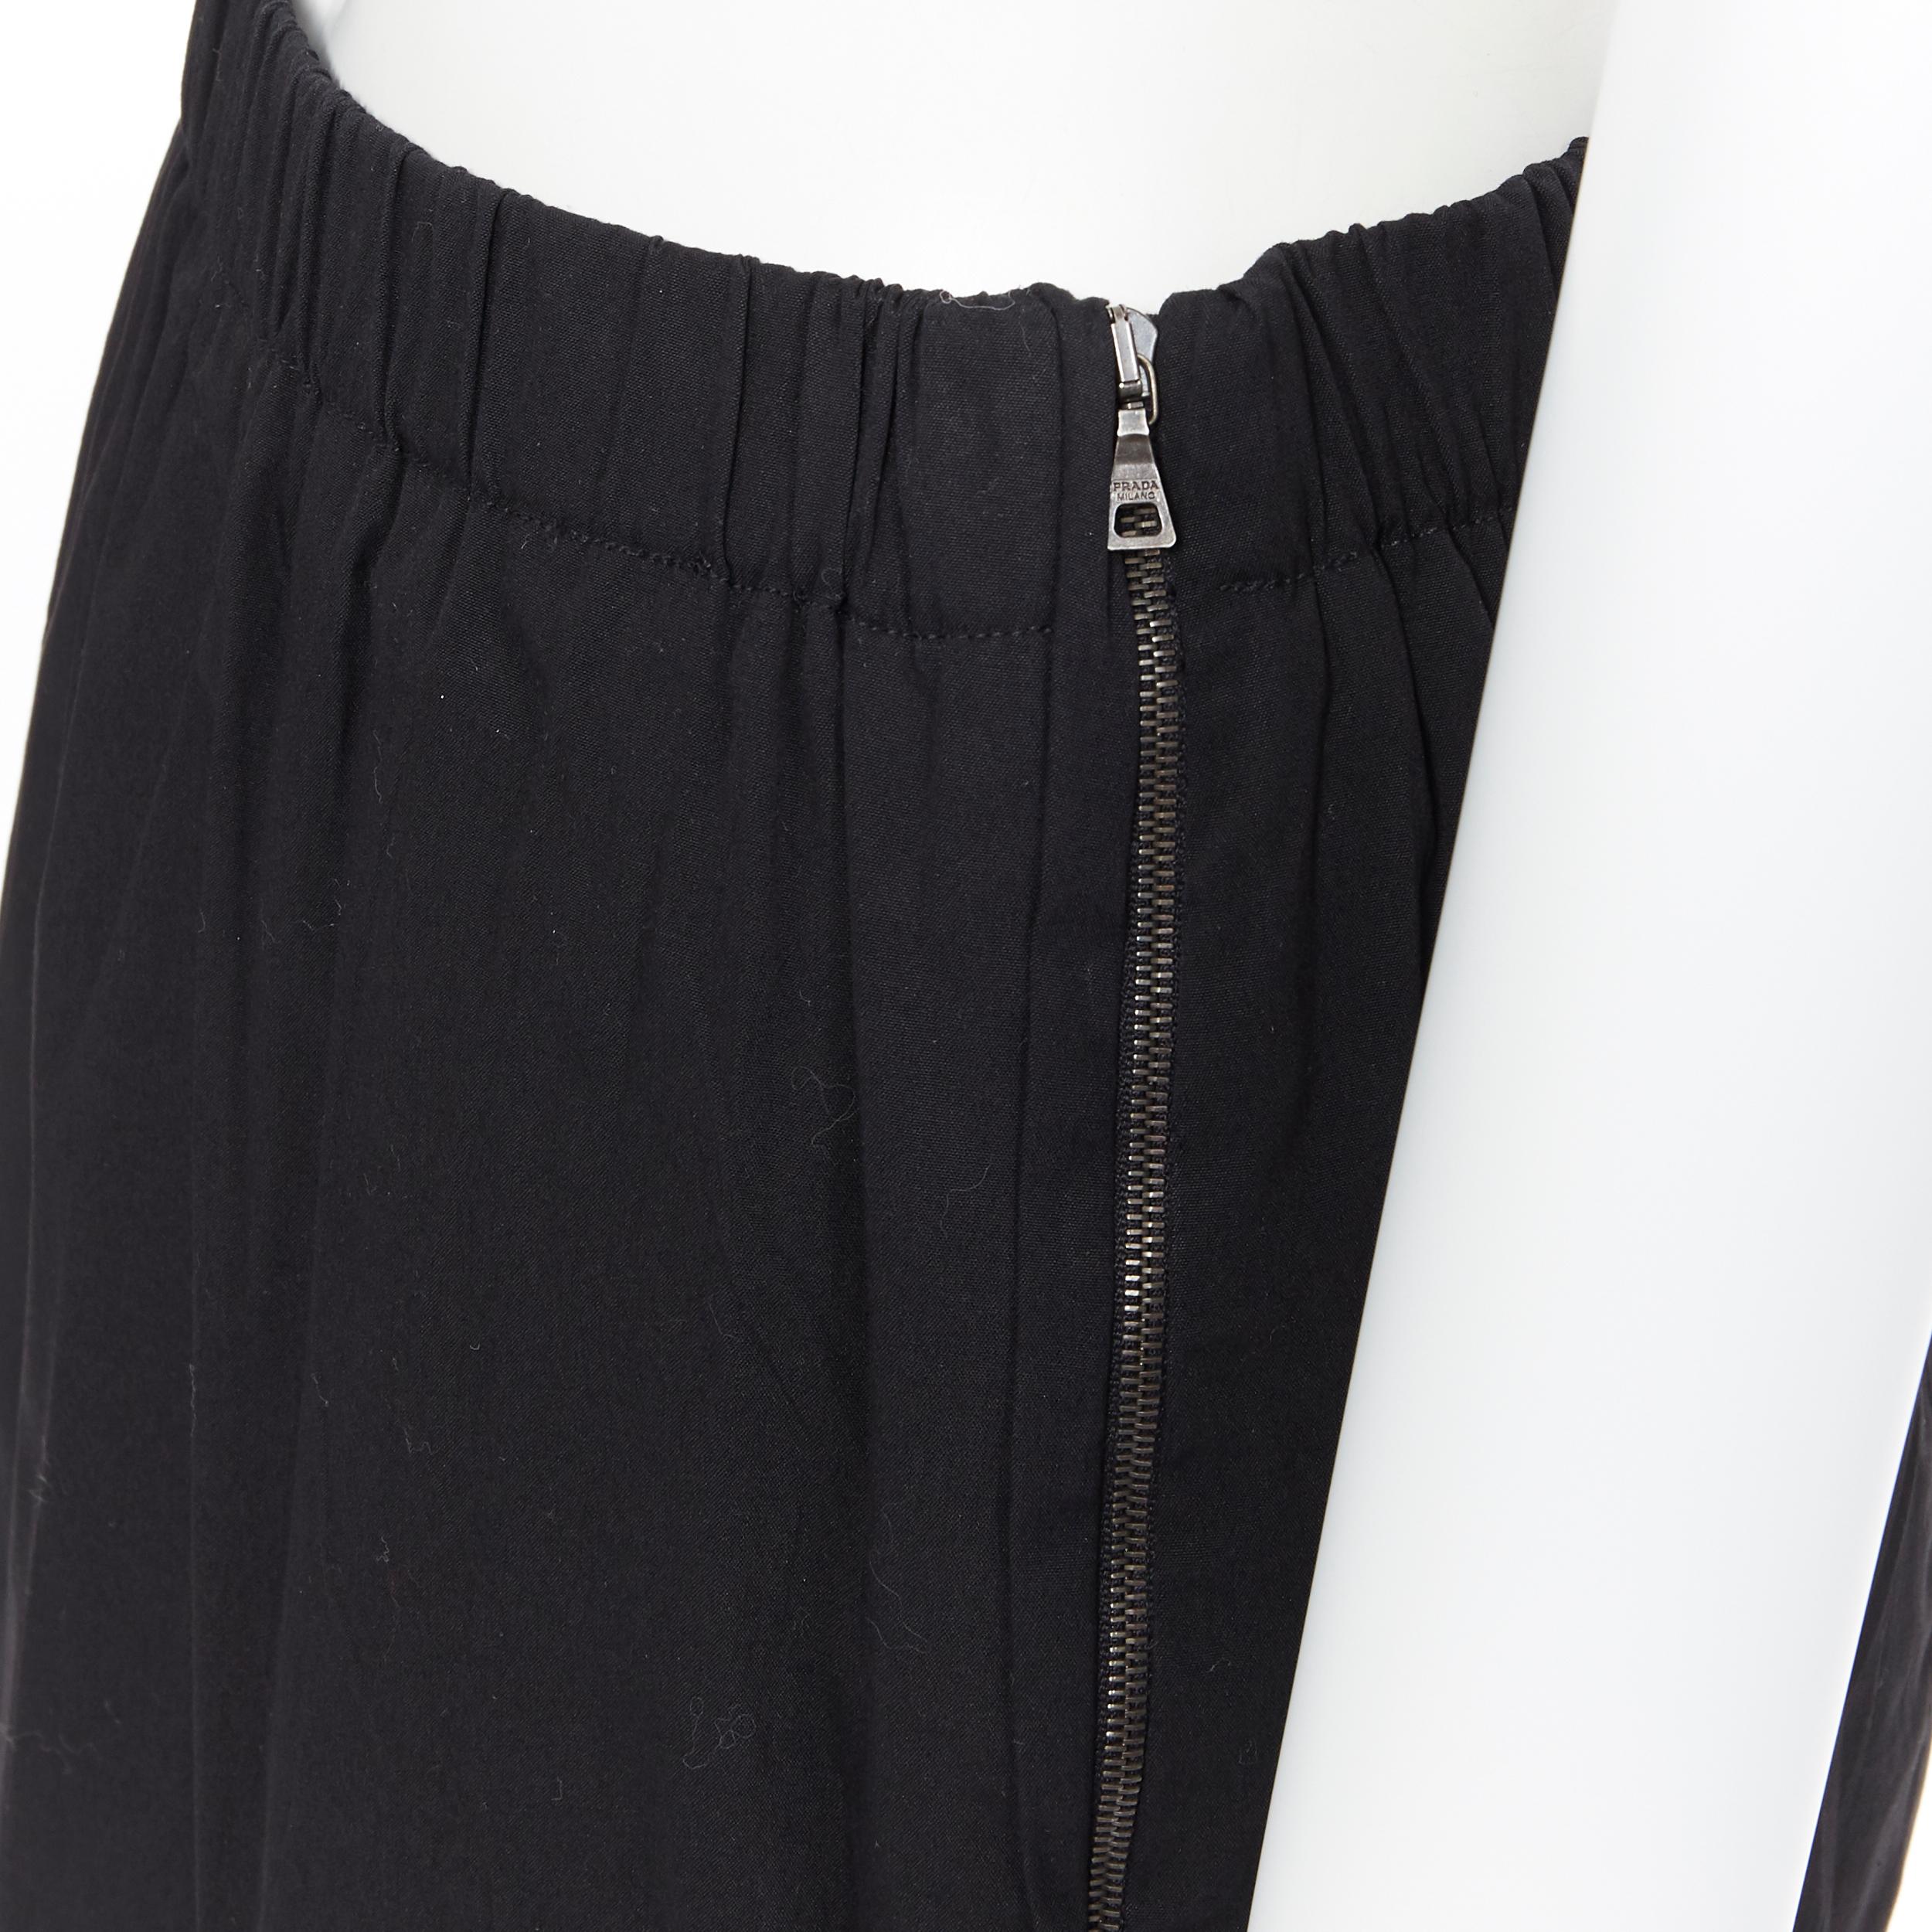 PRADA black cotton blend elasticated waist center vent casual skirt IT42
Brand: Prada
Designer: Miuccia Prada
Model Name / Style: Cotton skirt
Material: Cotton blend
Color: Black
Pattern: Solid
Extra Detail: Mid rise.
Made in: Italy

CONDITION: